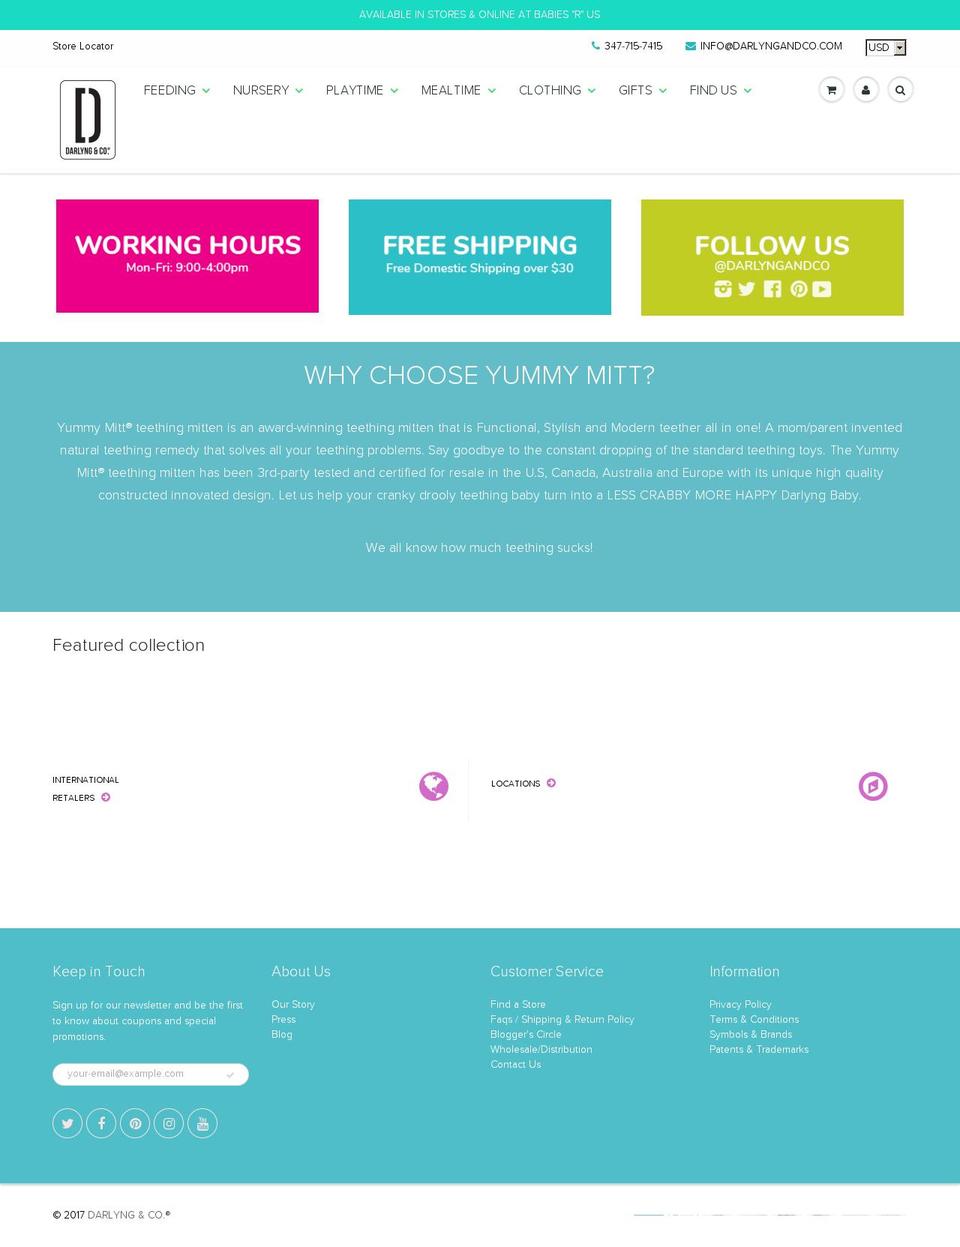 ShowTime Shopify theme site example darlyngandco.com